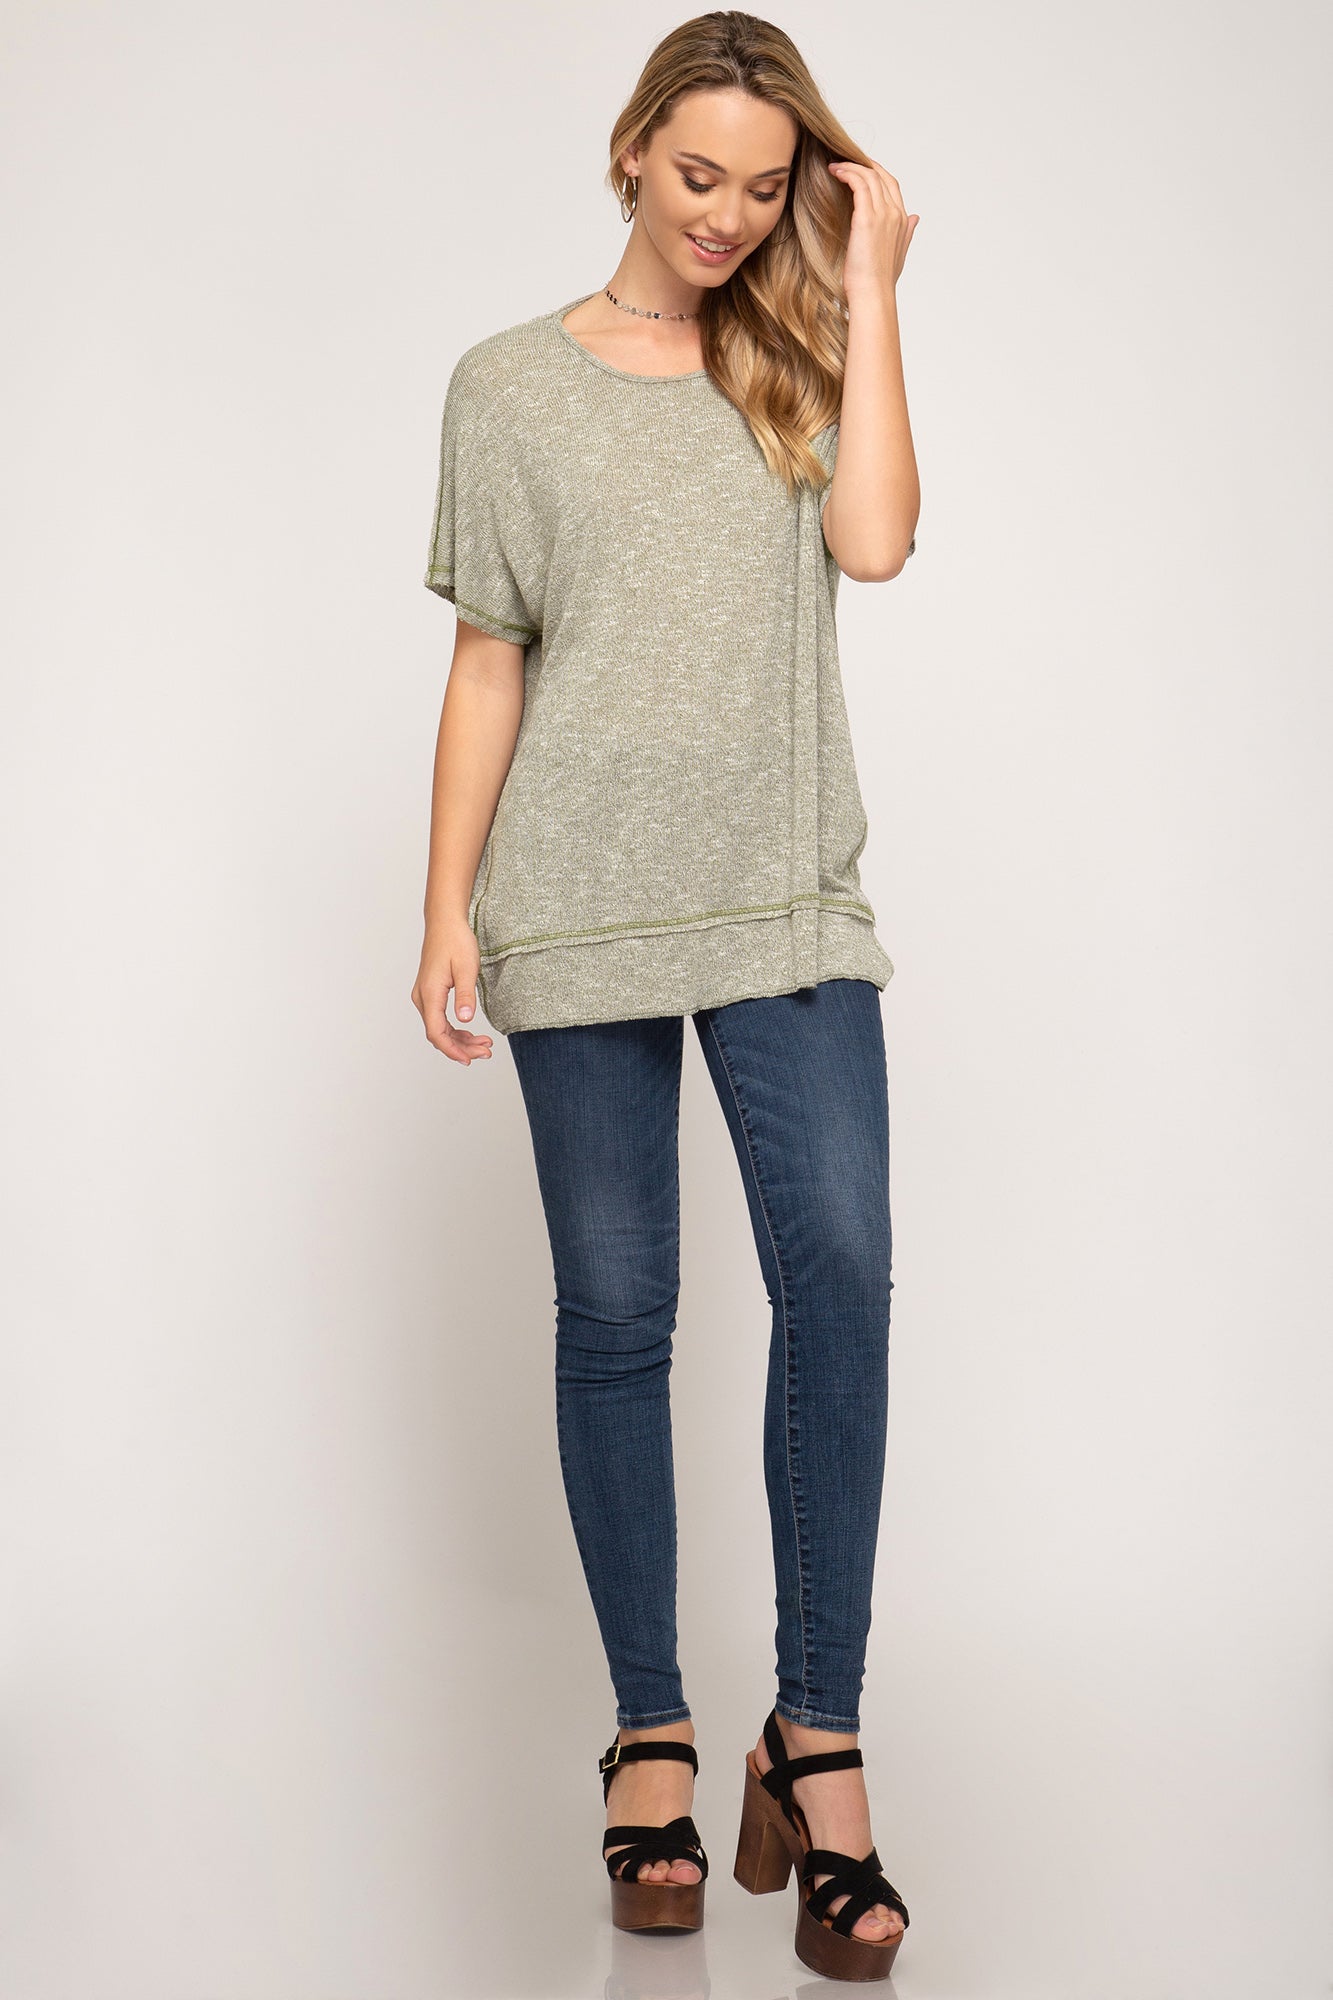 Solid Short Sleeve Top With Open Back Detail!